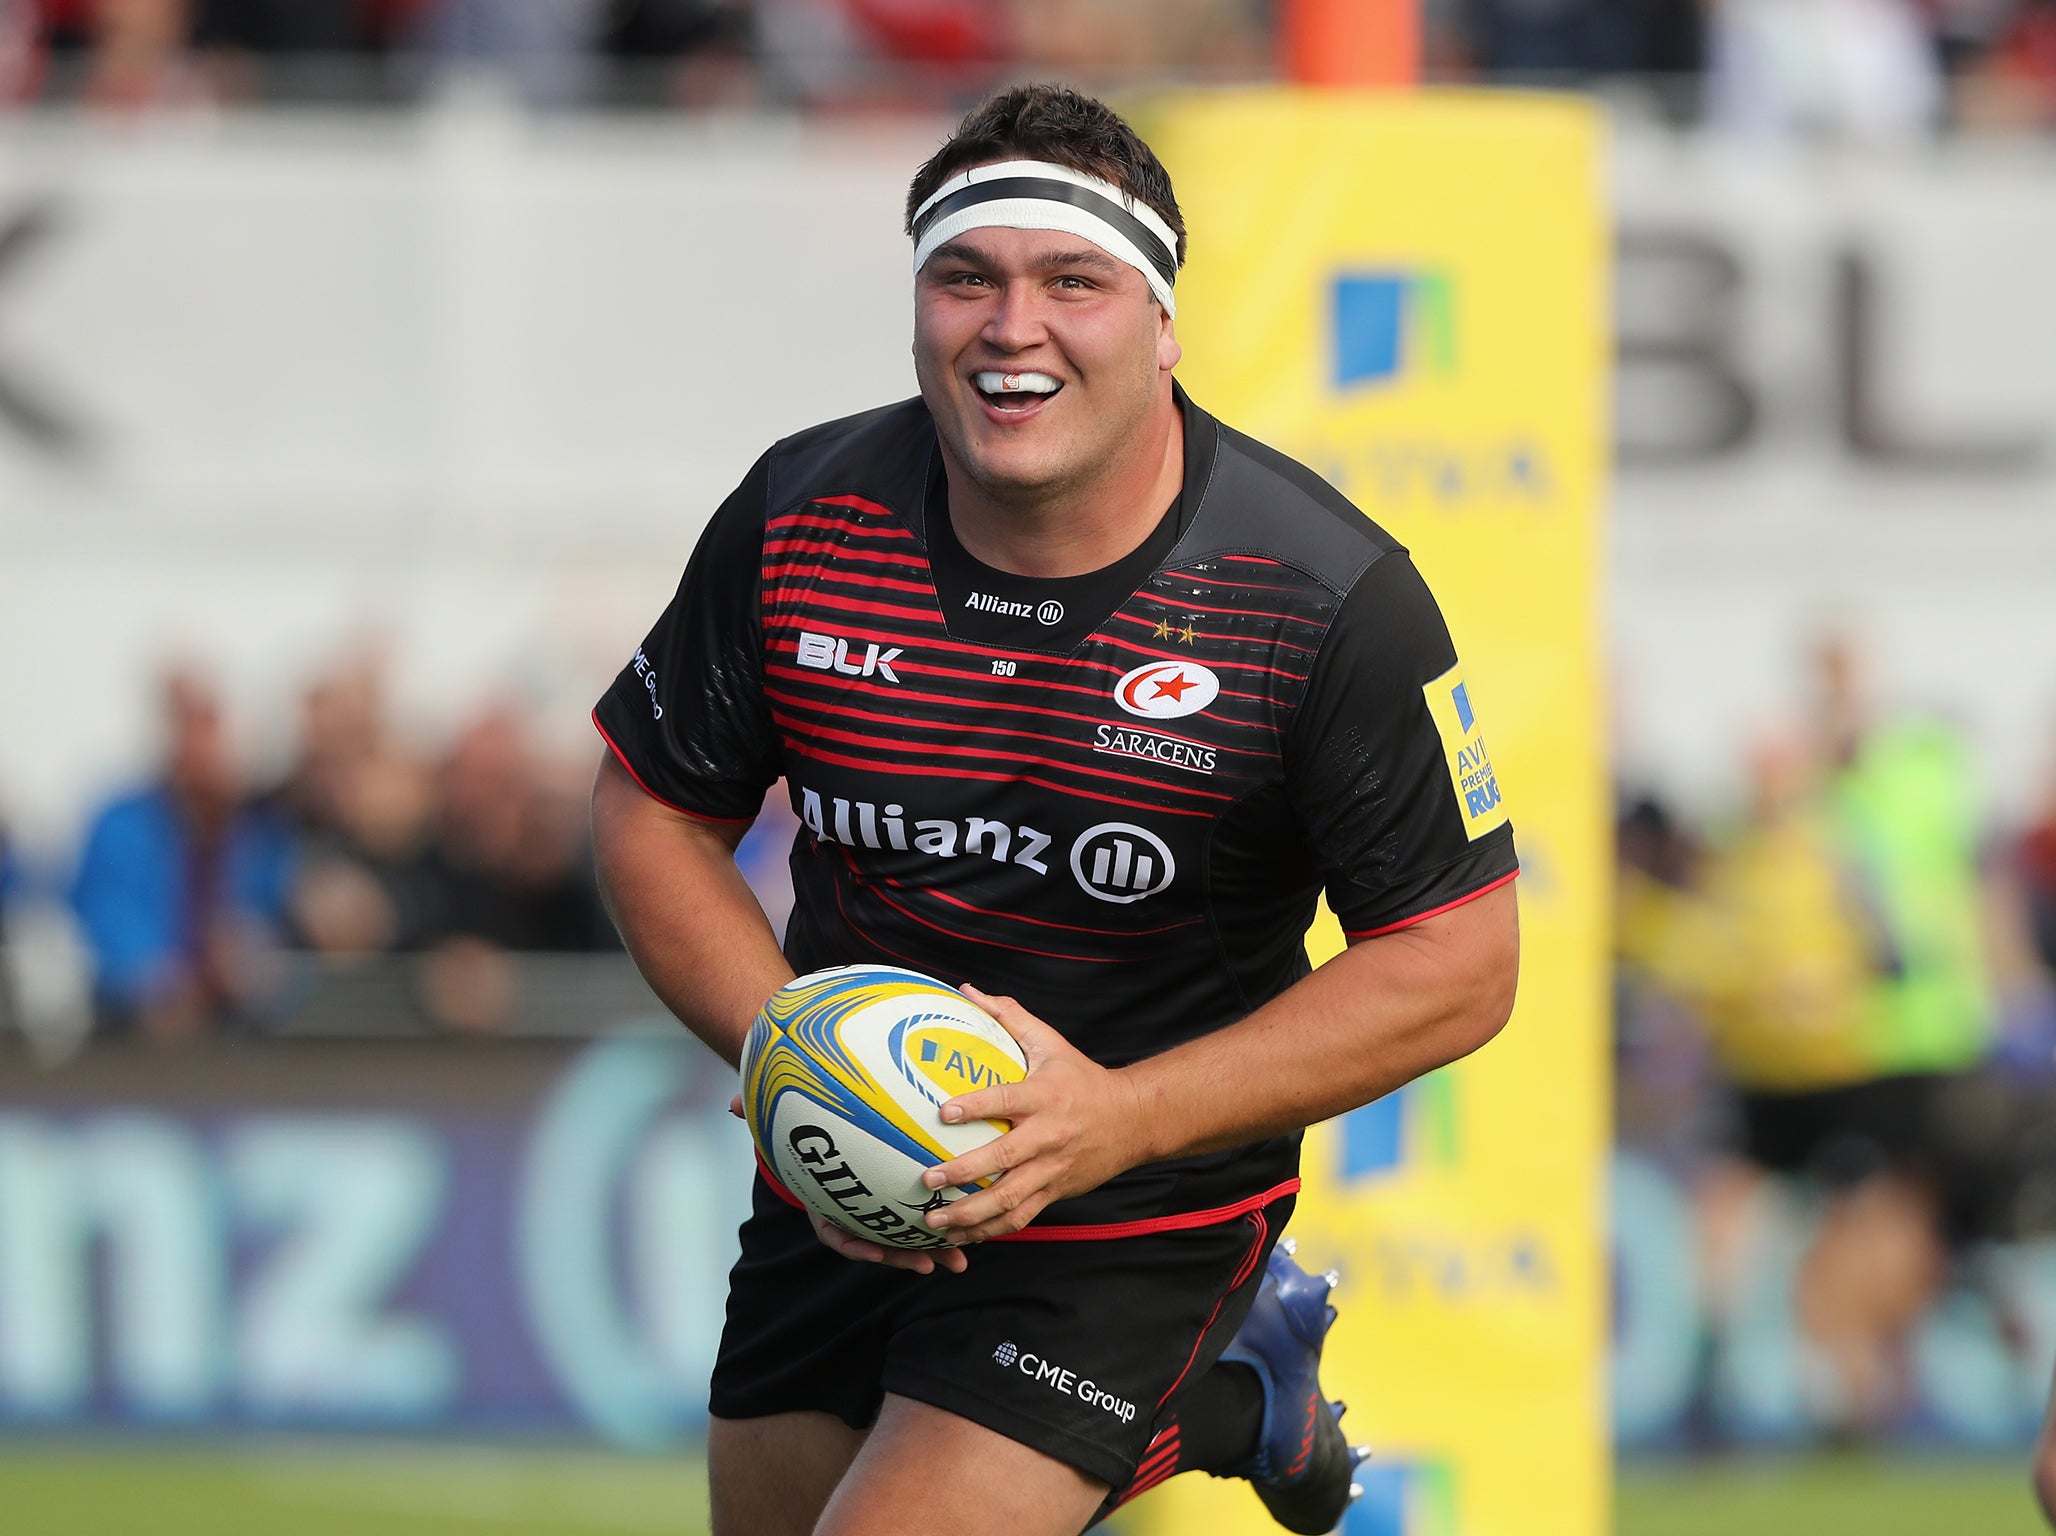 George scored a hat-trick for Saracens